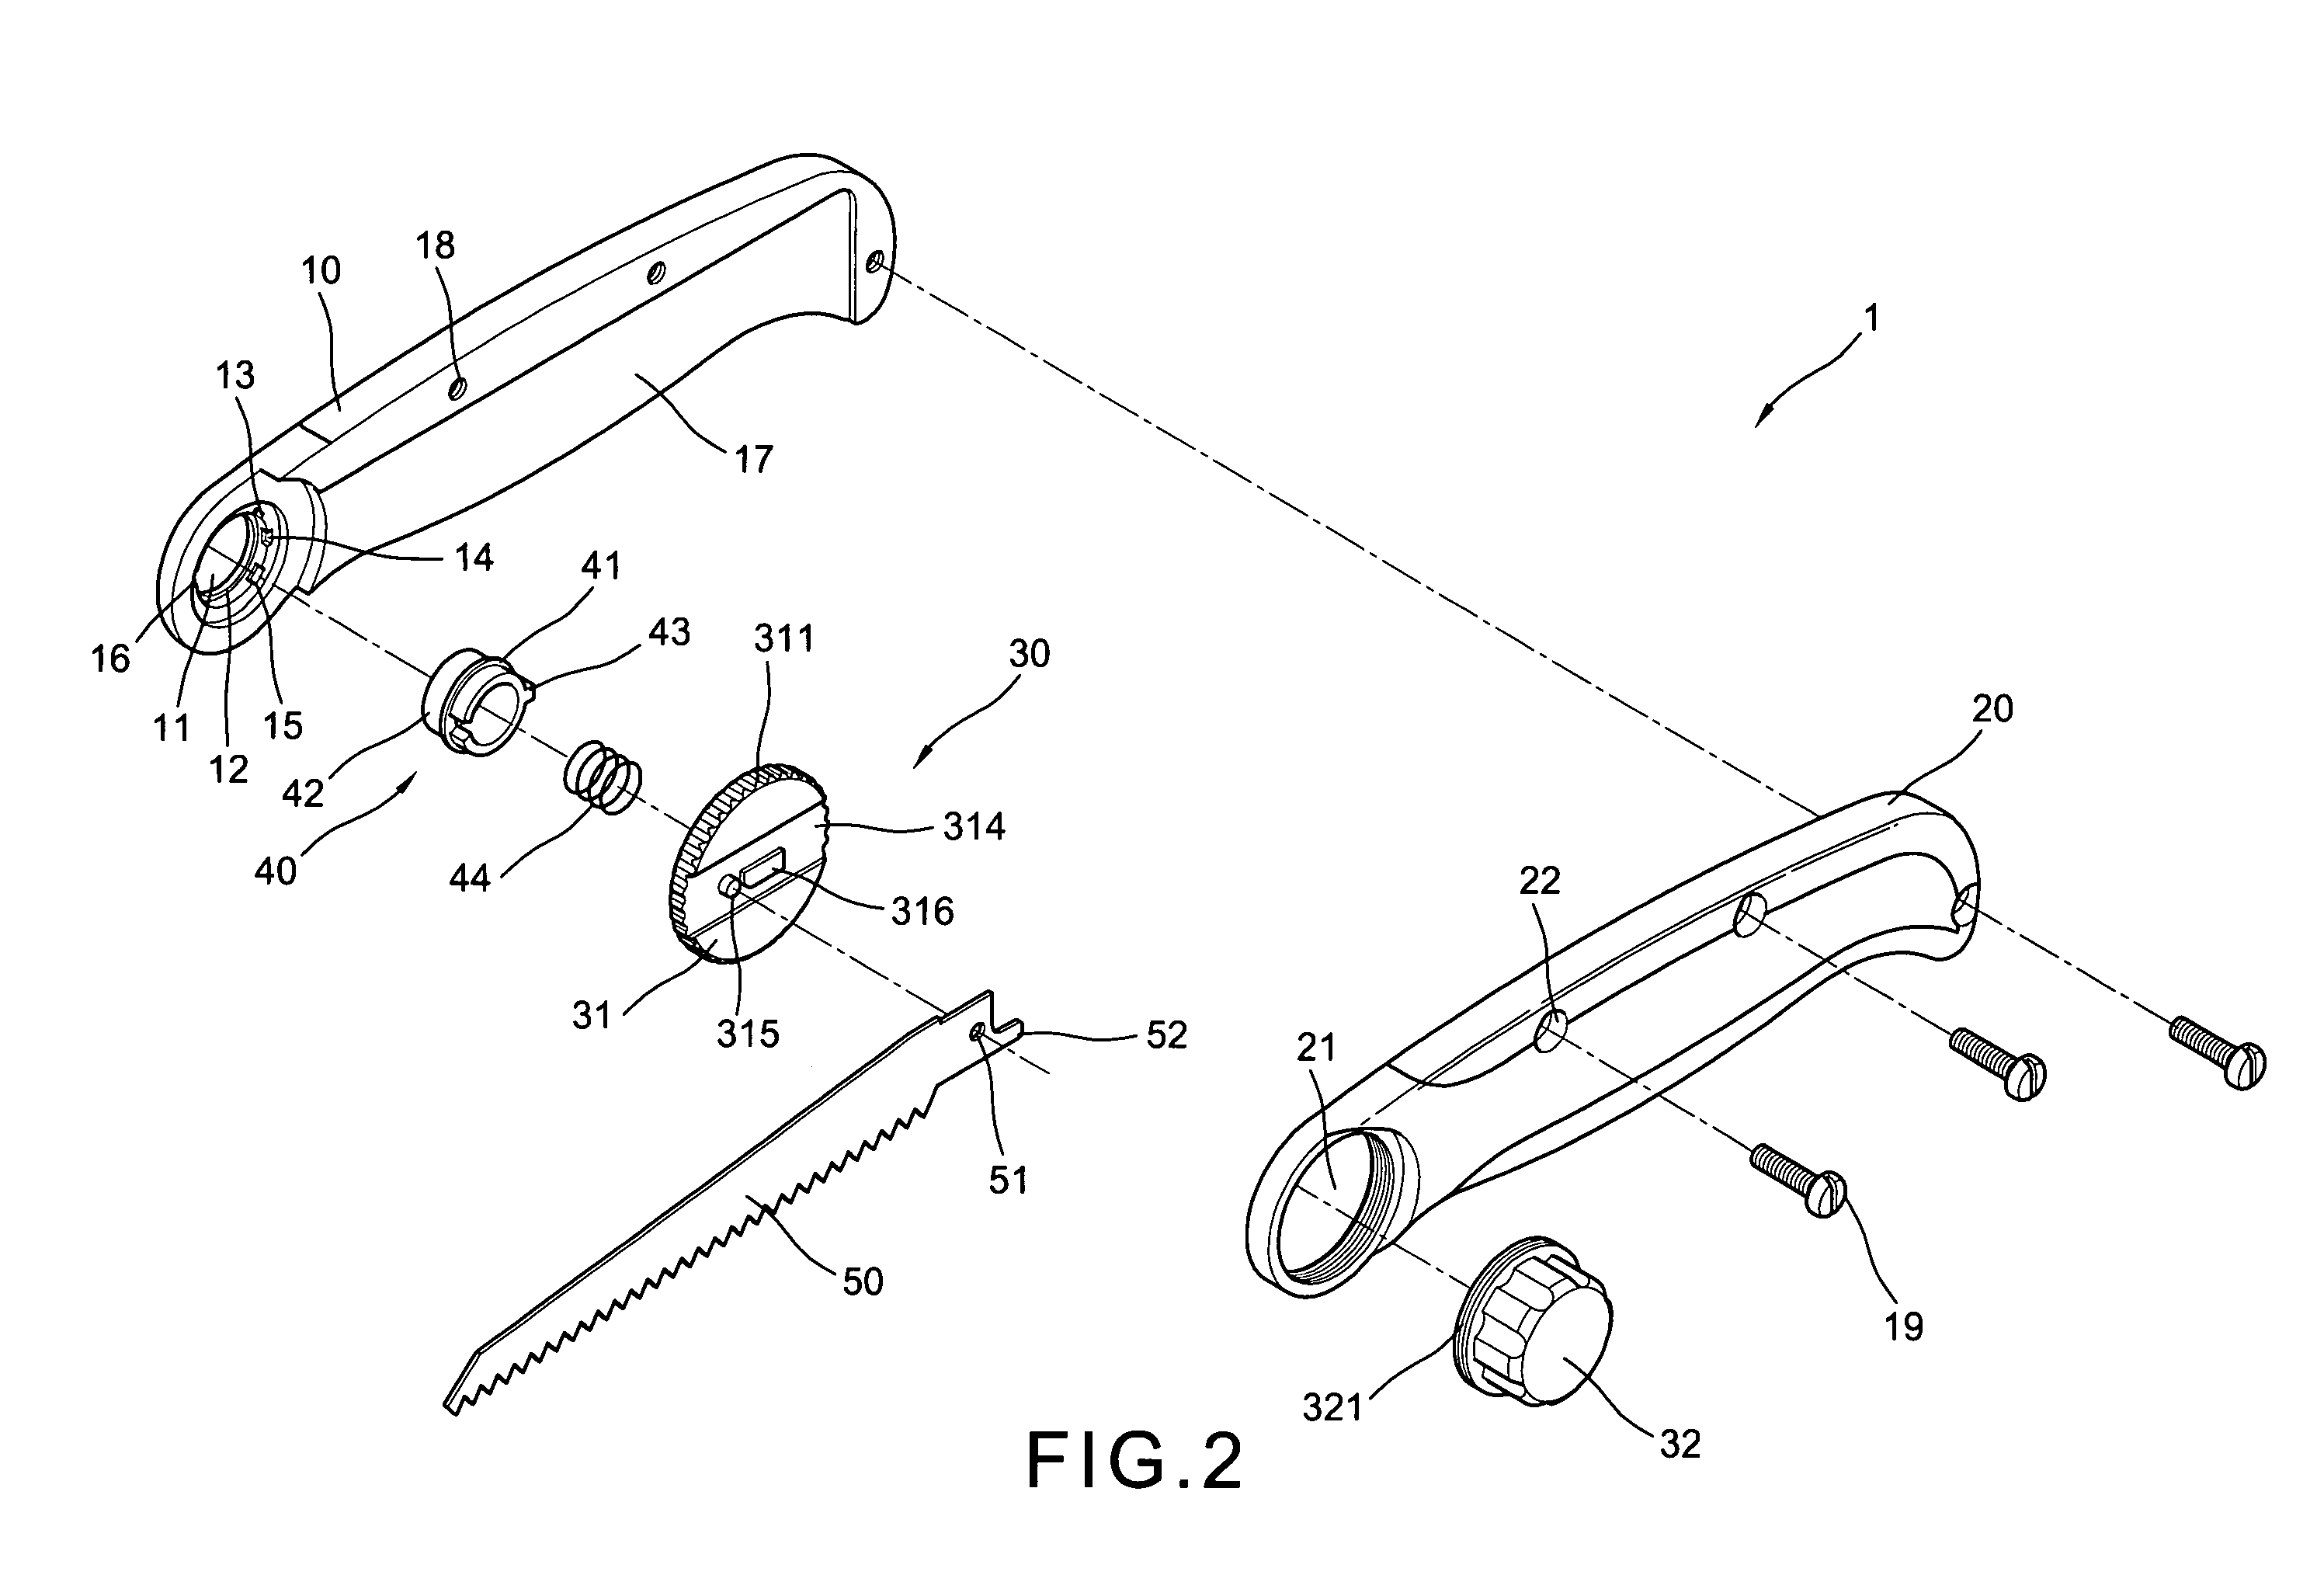 Angular adjustment device in the handle of a handsaw